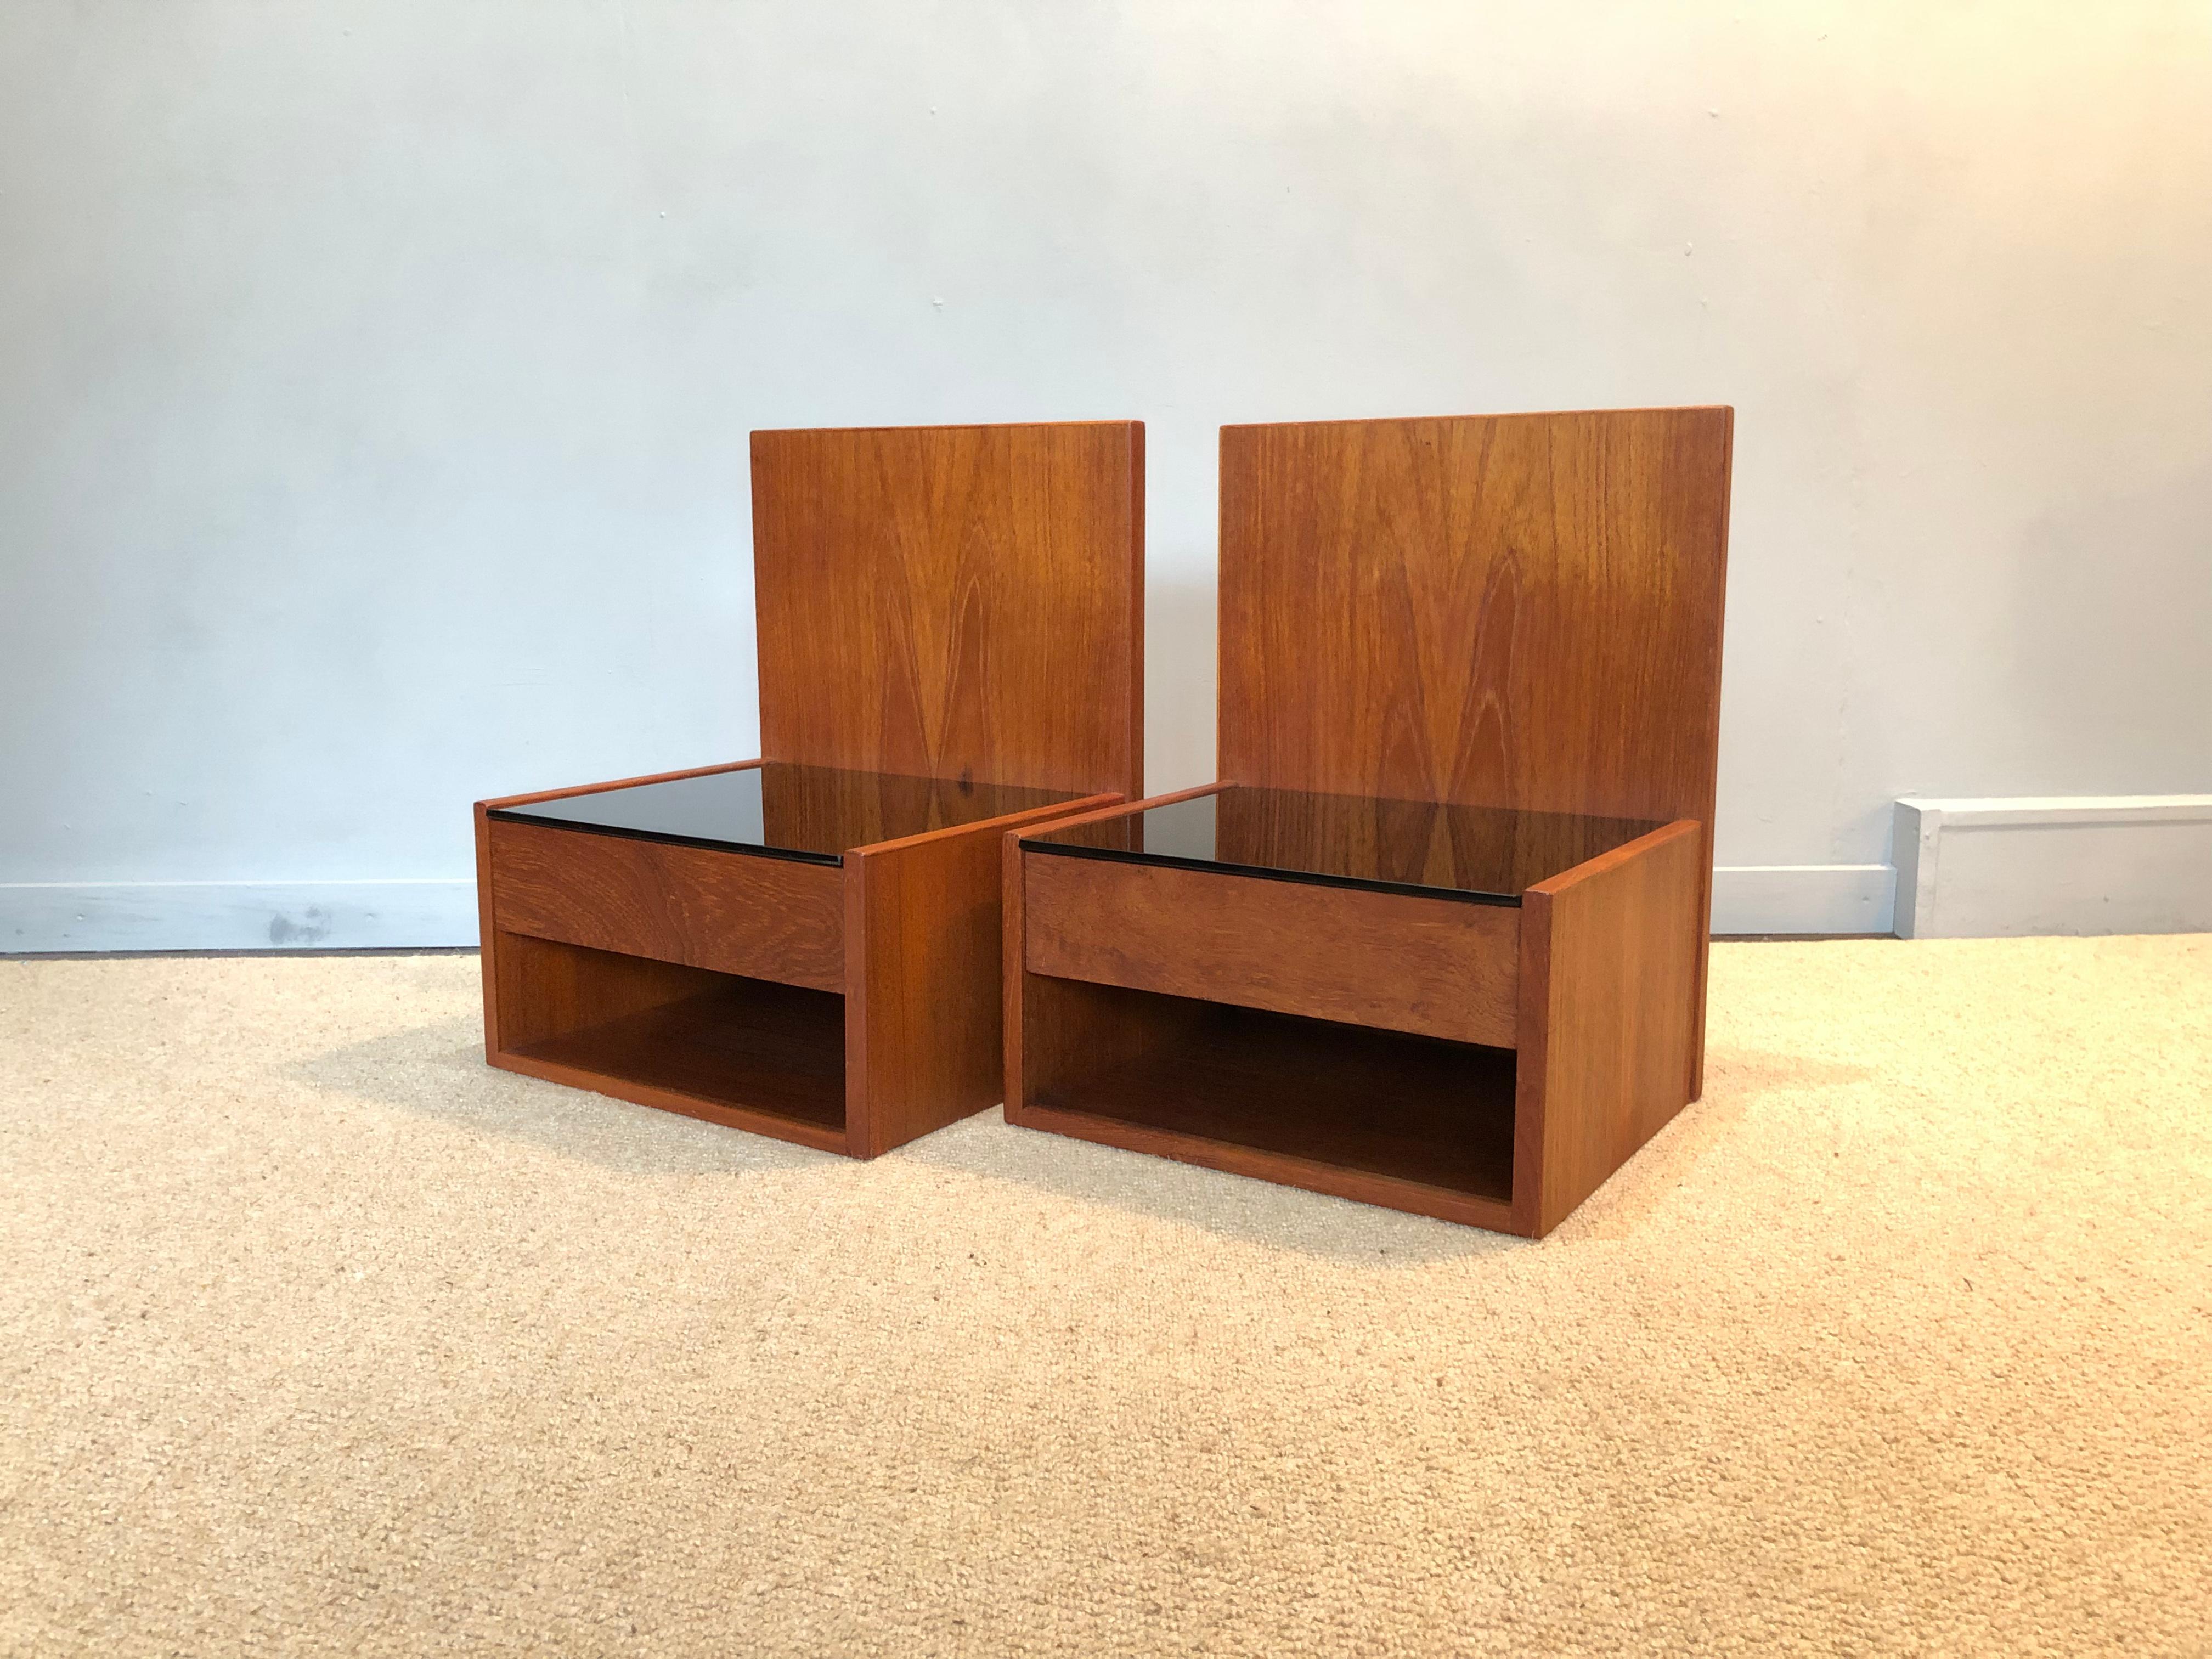 A pair of original Danish midcentury 1960s Hans J Wegner nightstands. Constructed from teak with a black glass surface. Manufactured by GETAMA, Denmark. Beautifully modernist design from the Danish master. These are designed to be ‘floating’